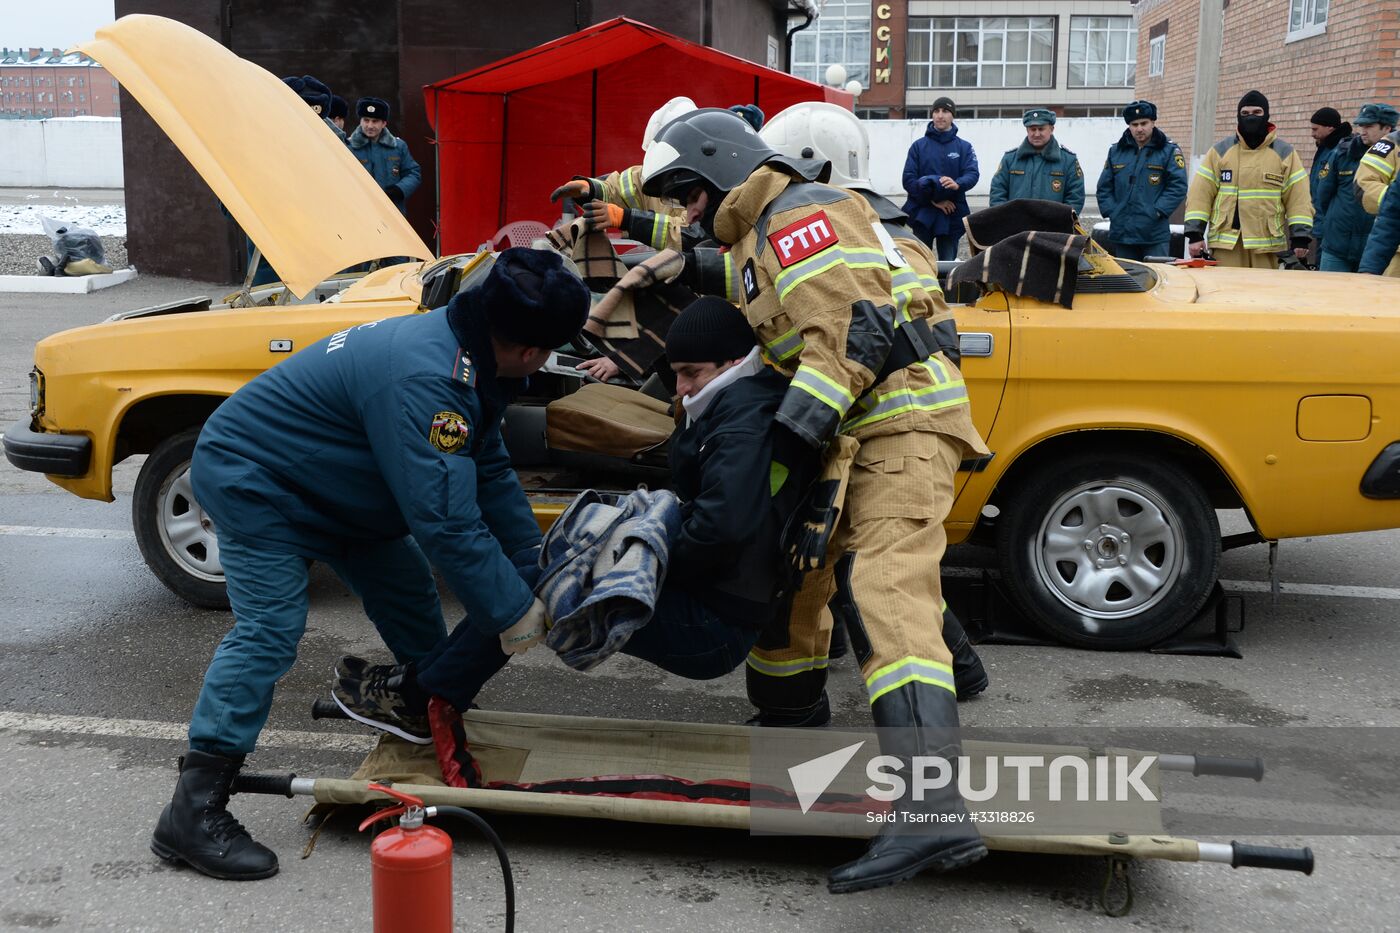 Competition in car accident relief efforts in Grozny